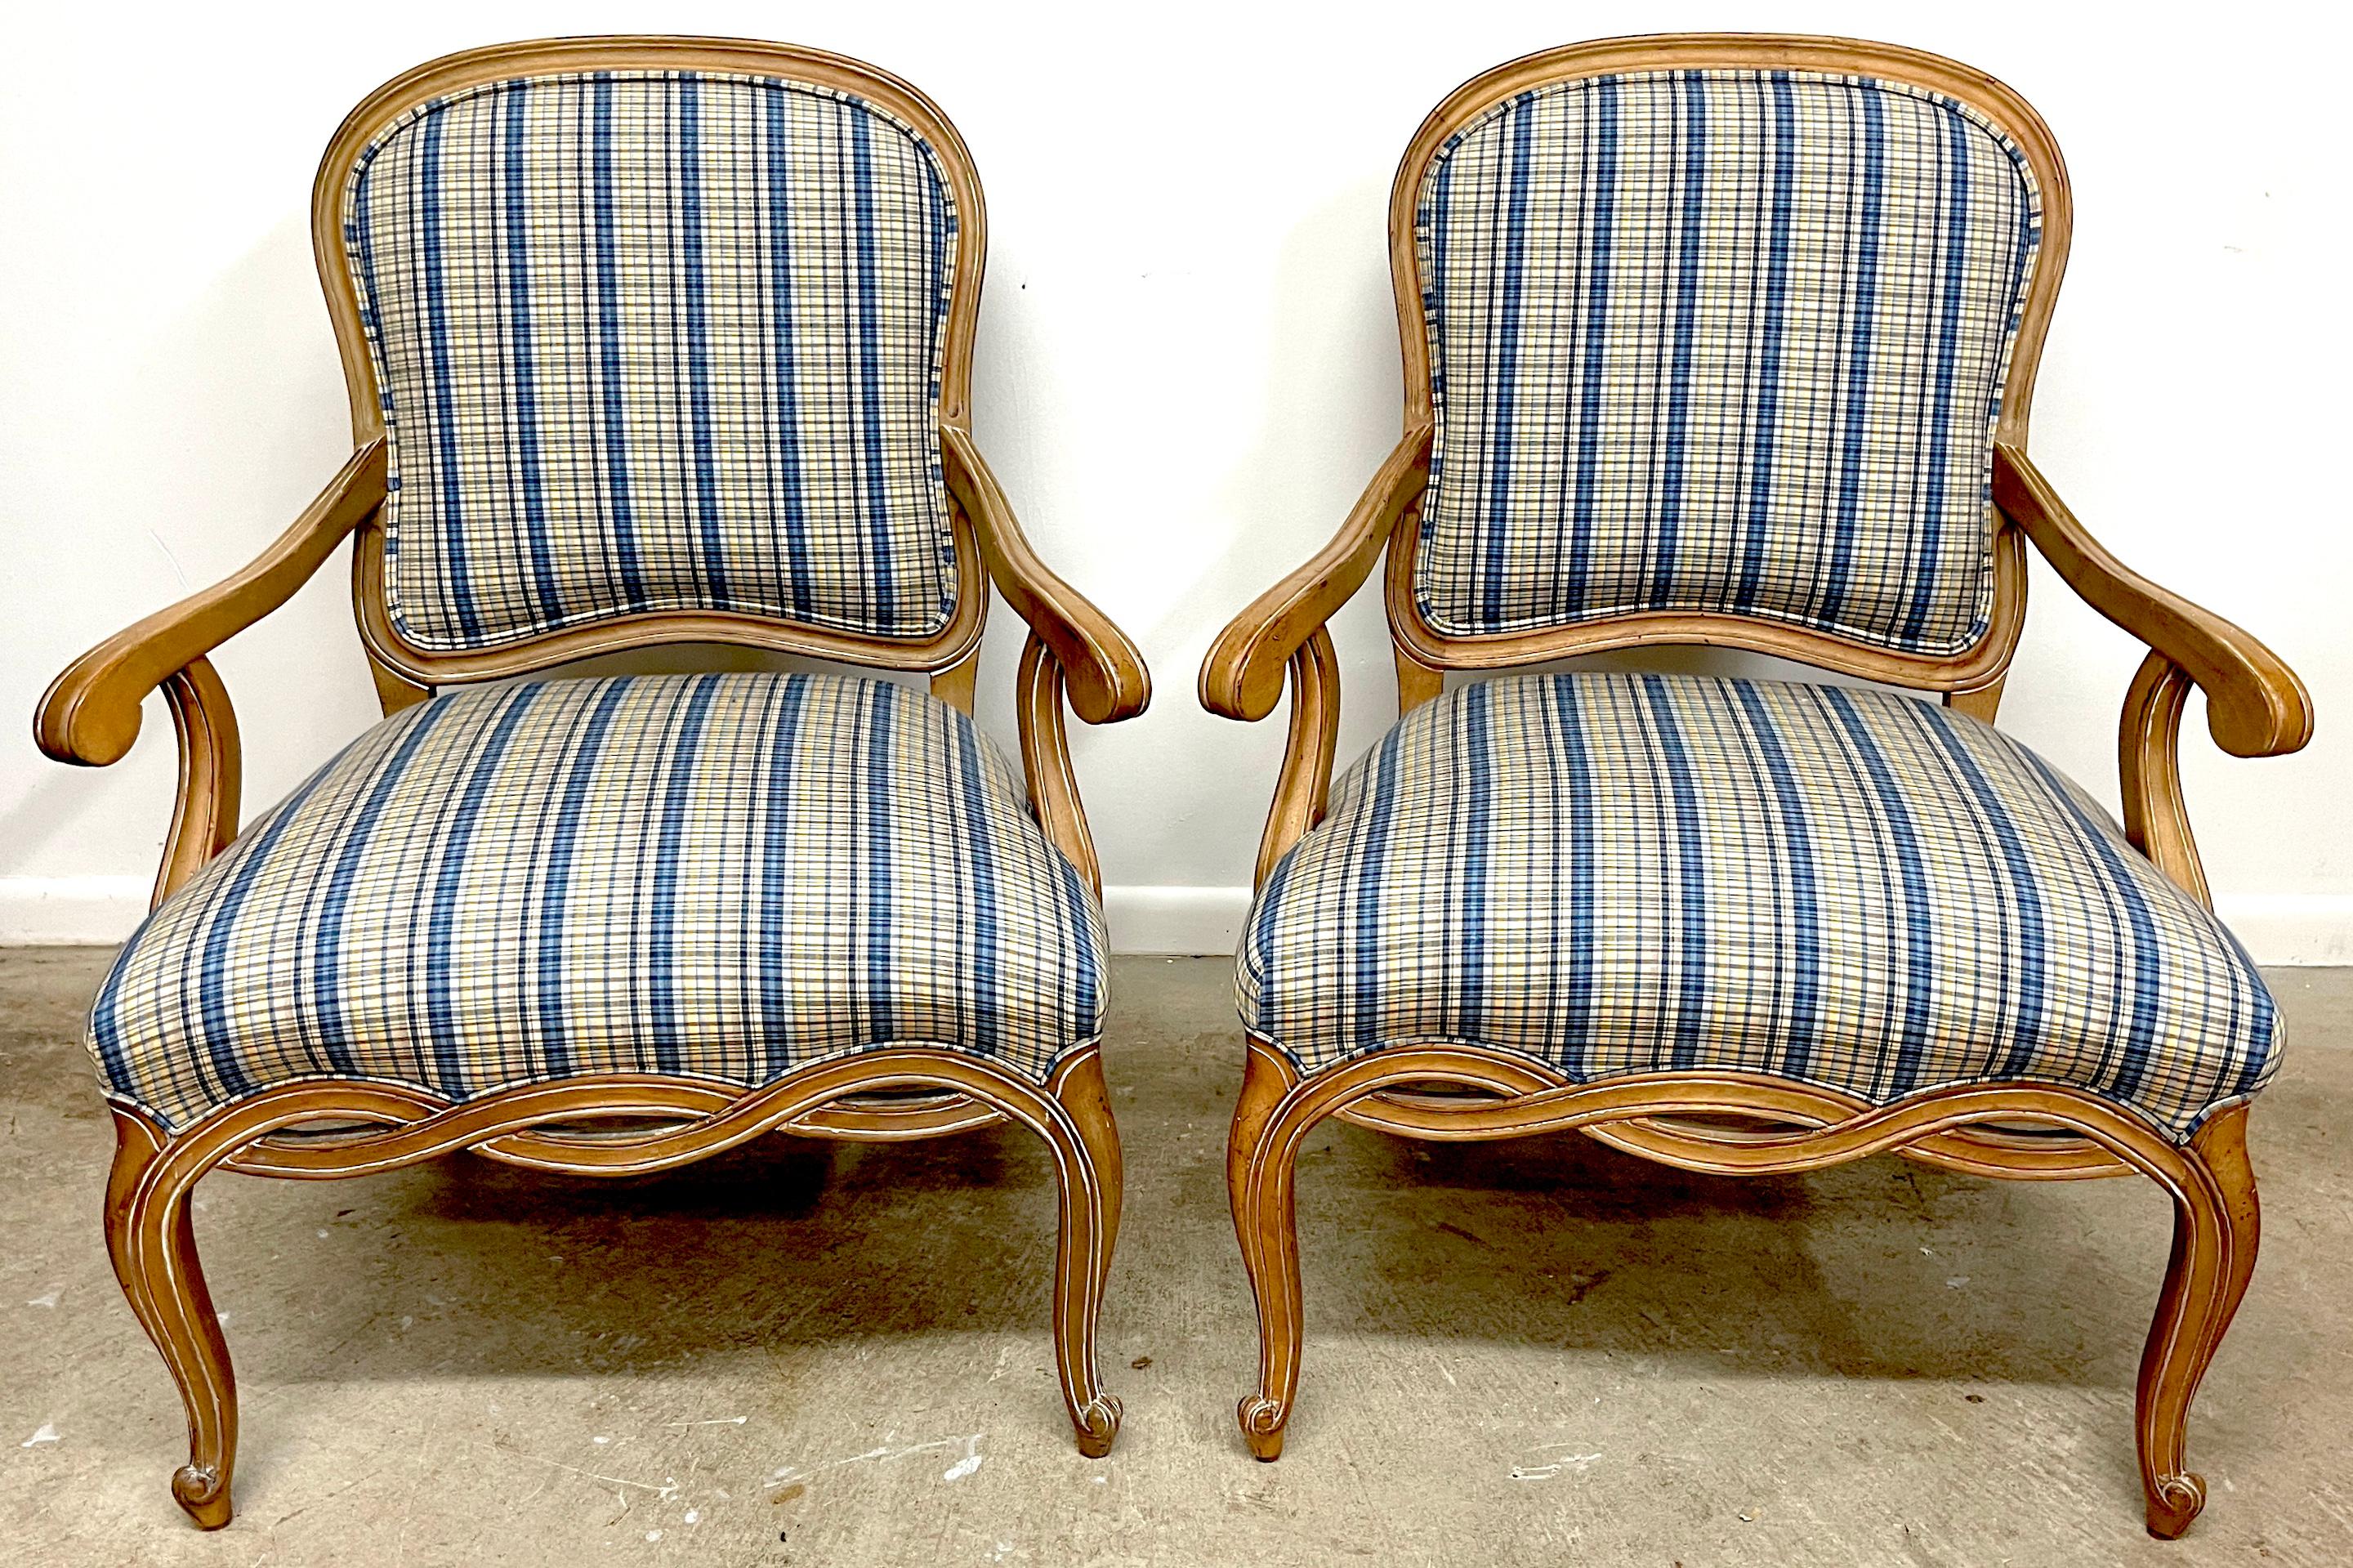 Pair Generous Italian Neoclassical Style Bleached Fruitwood Bergere/Armchairs 
Italy, 20th century 

A pair of beautiful Italian Neoclassical-style Bergere Armchairs, crafted in the 20th century from bleached fruitwood. The 'Generous' chairs boast